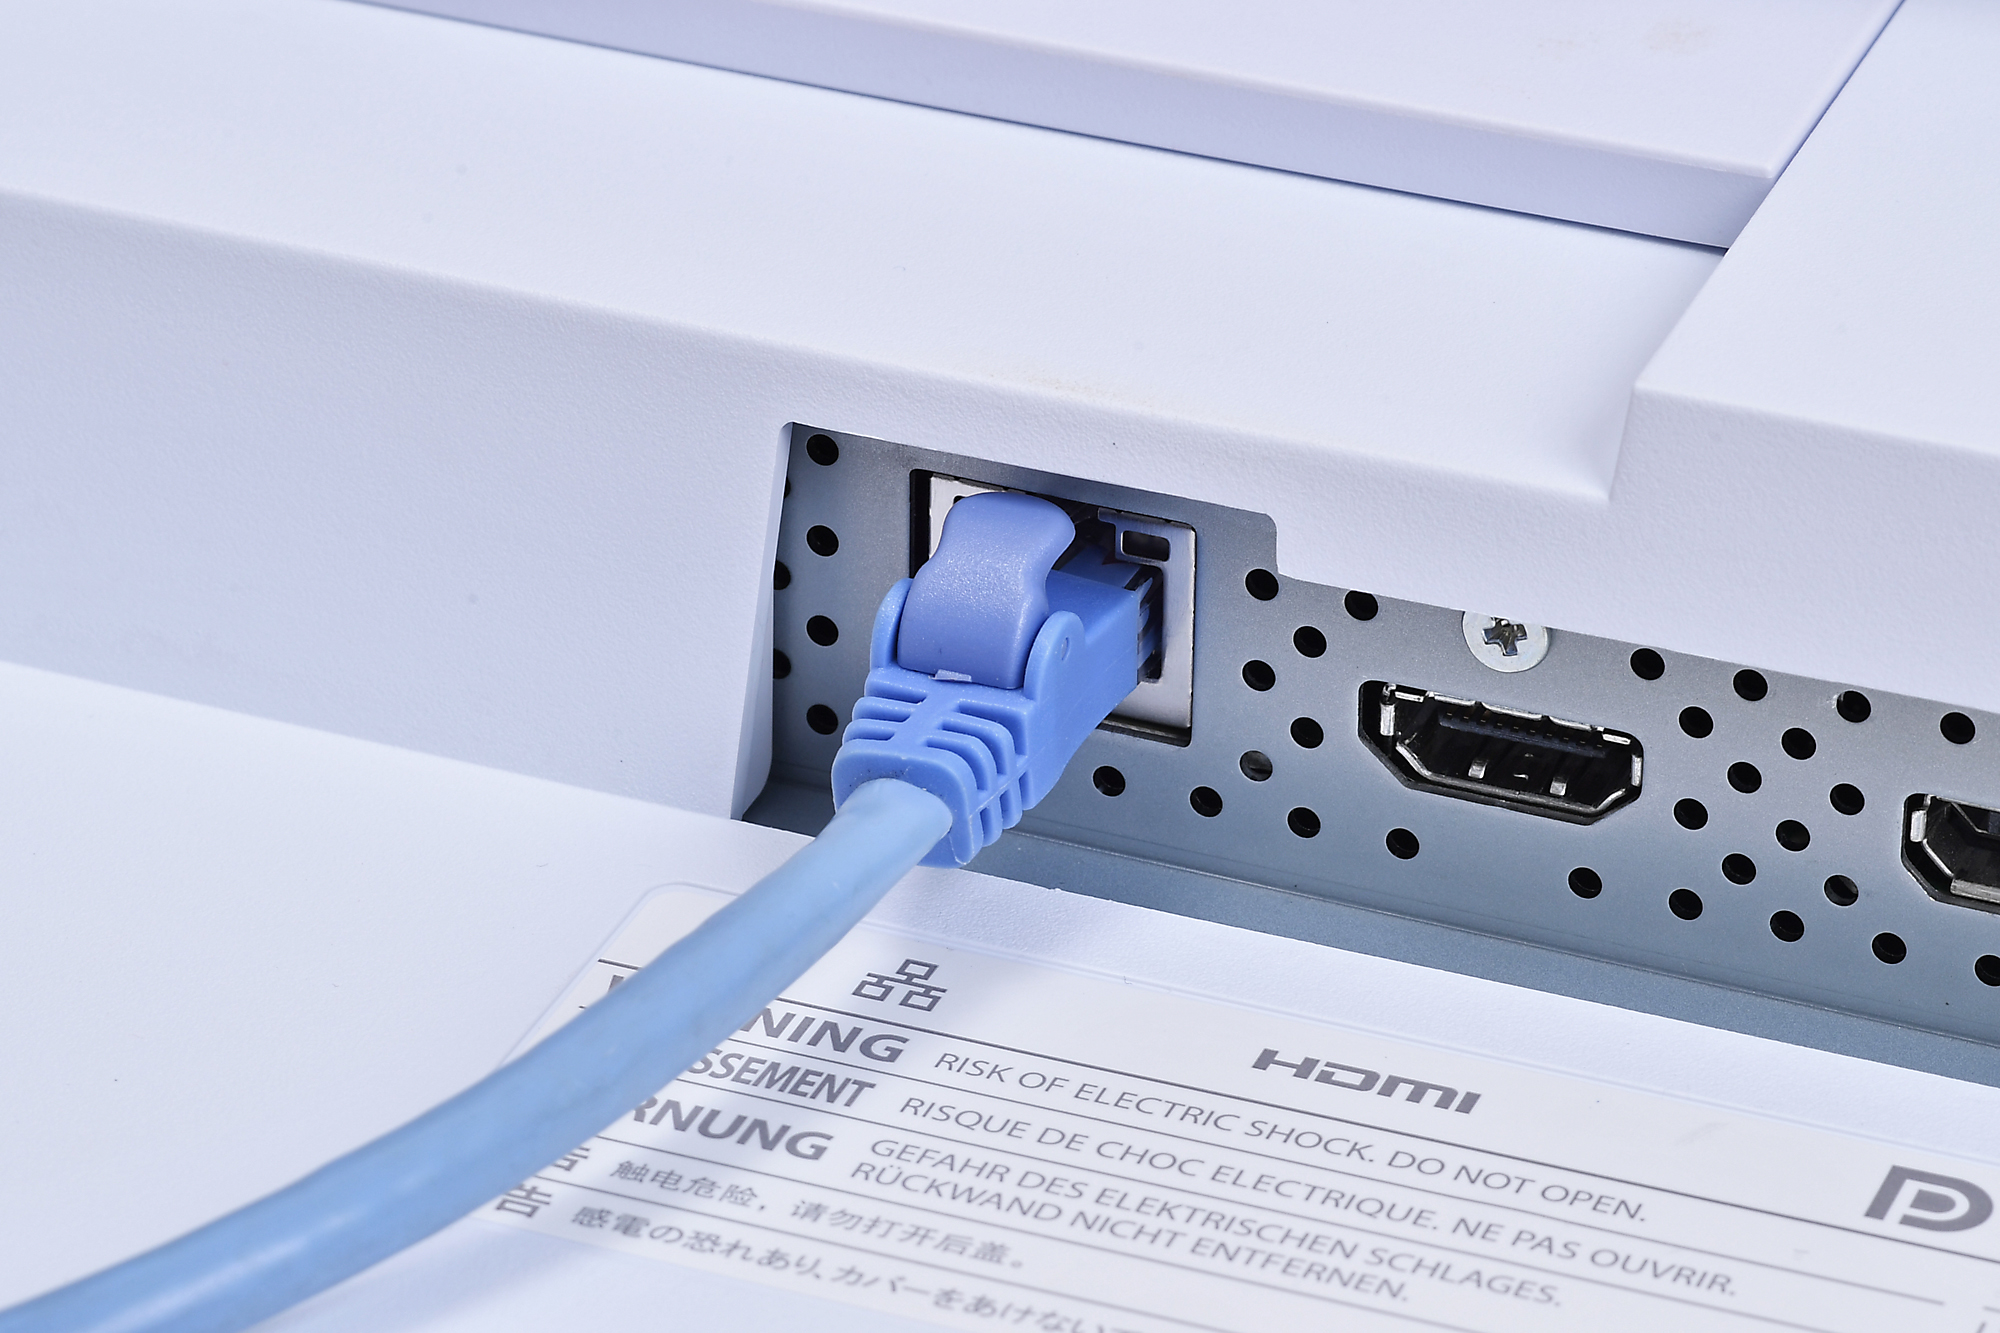 Connect your router or hub directly to the monitor's LAN port for a stable wired connection.